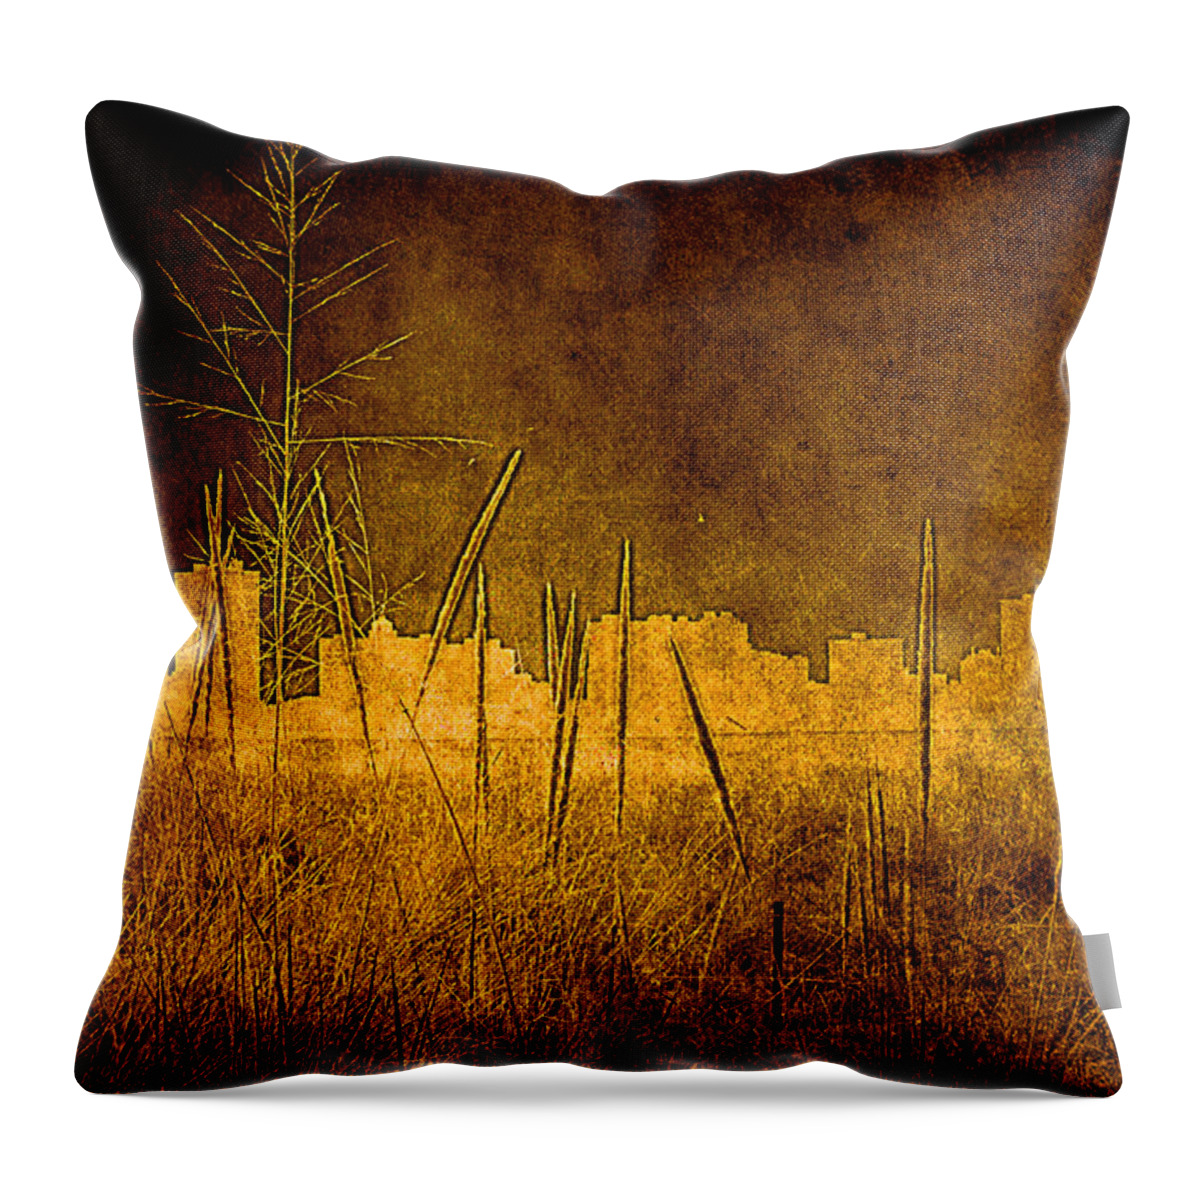 City Throw Pillow featuring the photograph City Art by Milena Ilieva